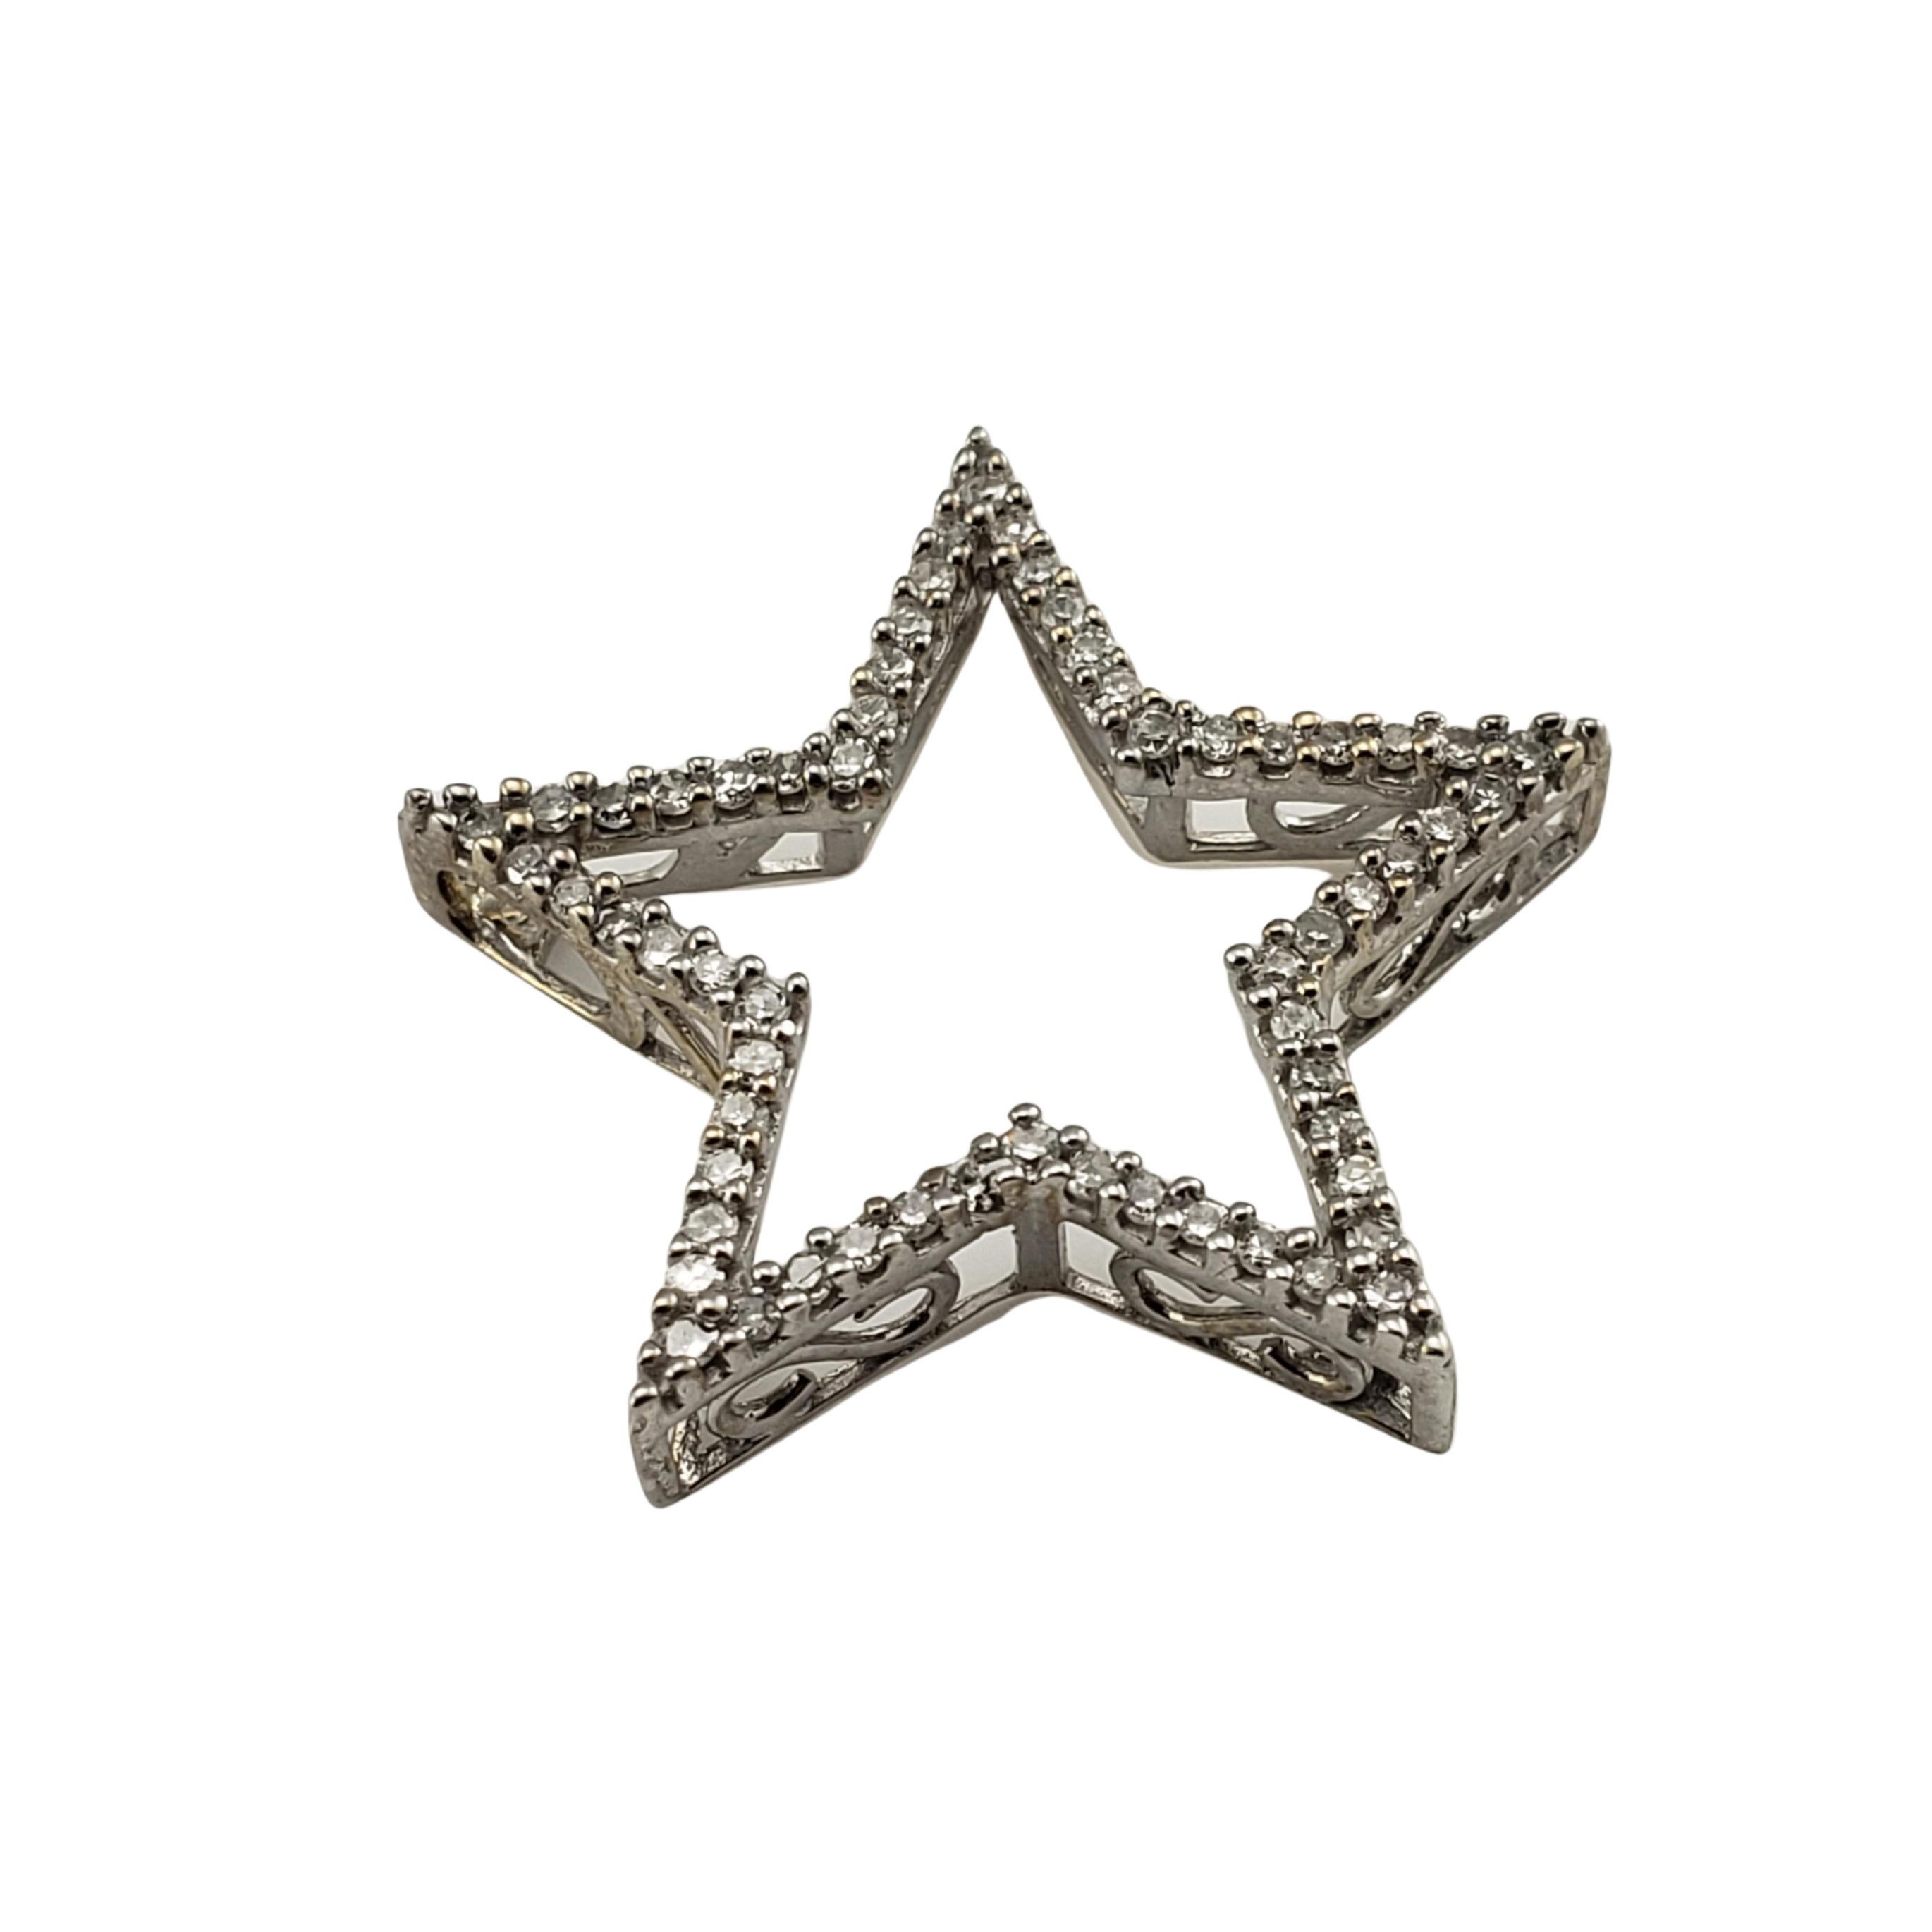 Vintage 10 Karat White Gold and Diamond Star Pendant-

This sparkling star pendant features 59 round single cut diamonds set in classic 10K white gold.  

Approximate total diamond weight:  .30 ct.

Diamond color:  J-K

Diamond clarity:  I1

Size: